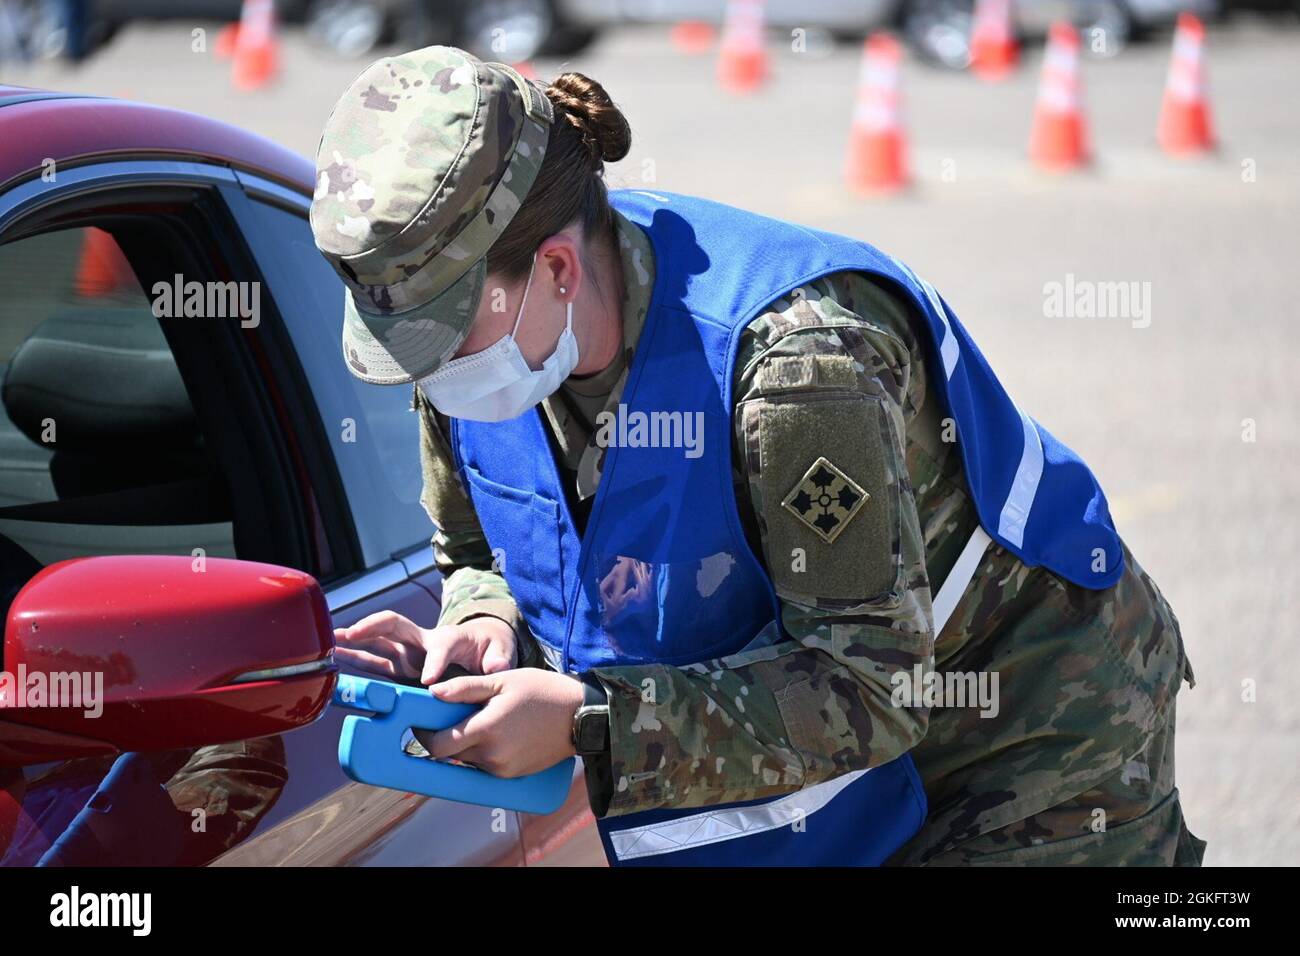 U.S. Army Spc. Bethany Parks, a Bloomfield, New Mexico, native and combat medic, assigned to the 1st Battalion, 12th Infantry Regiment, checks in a patient at the drive-up lanes at the Community Vaccination Site (CVS) in Pueblo, Colorado, April 11, 2021. The drive-up lanes enable community members to acquire their COVID vaccination without having to exit their vehicles. U.S. Northern Command, through U.S. Army North, remains committed to providing continued, flexible Department of Defense support to the Federal Emergency Management Agency as part of the whole-of-government response to COVID-19 Stock Photo